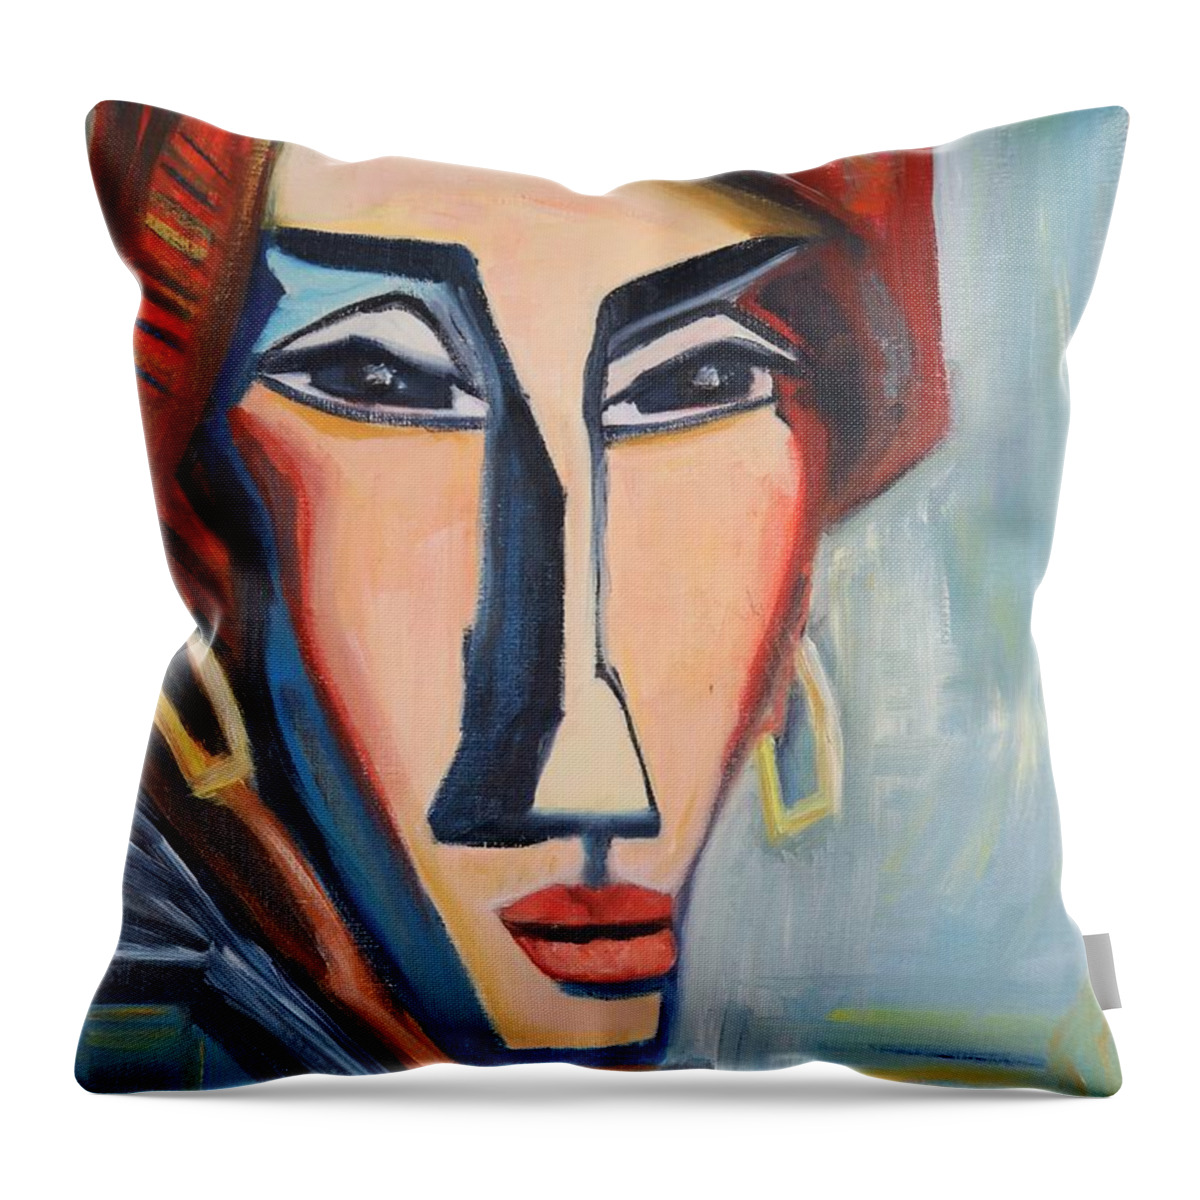 Expressionist Throw Pillow featuring the painting The Golden Earrings by Christel Roelandt